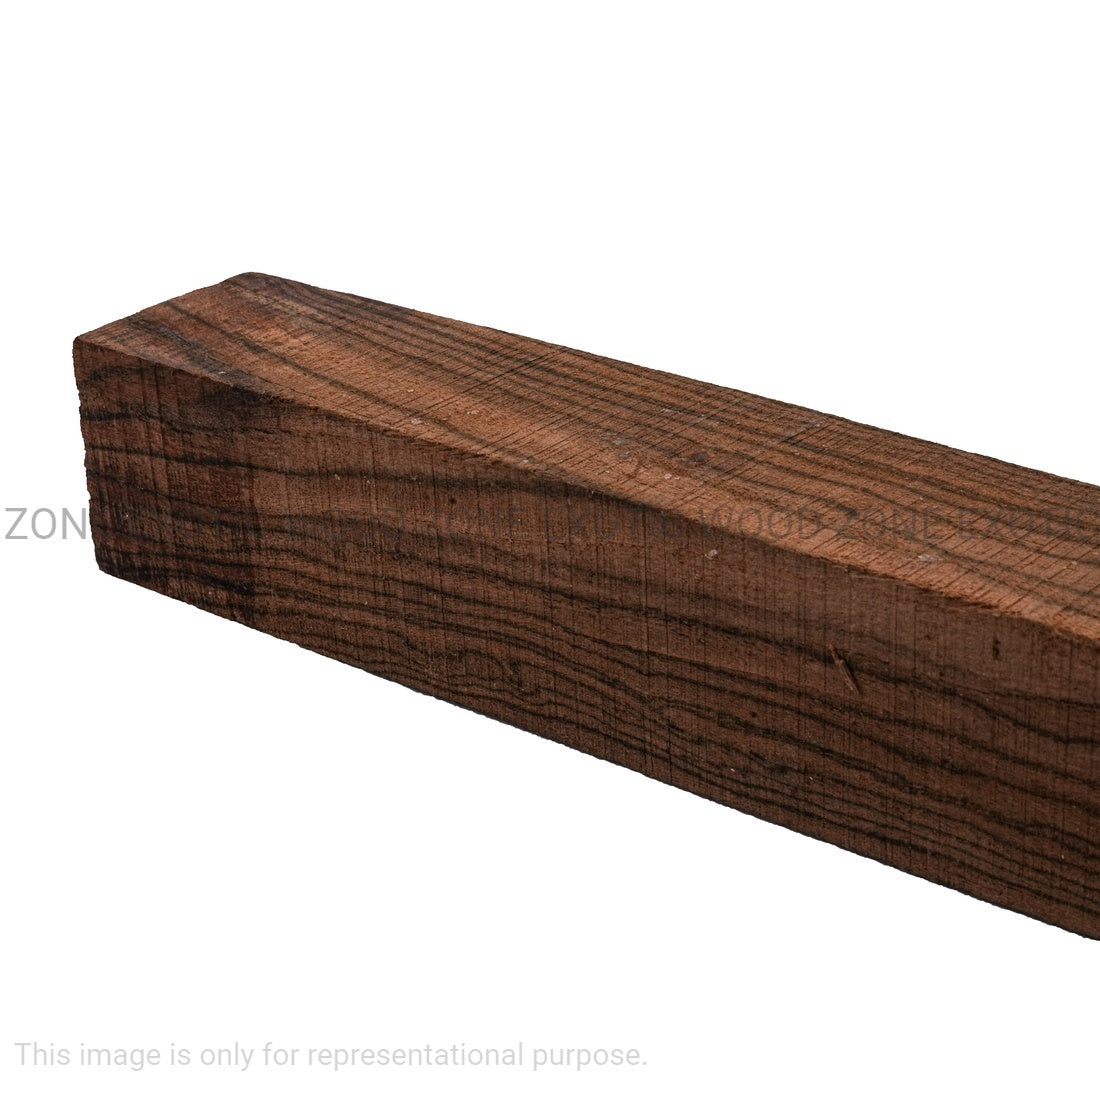 Bocote Exotic Wood Pool Cue Blanks 1-1/2&quot;x 1-1/2&quot;x 18&quot; - Exotic Wood Zone - Buy online Across USA 